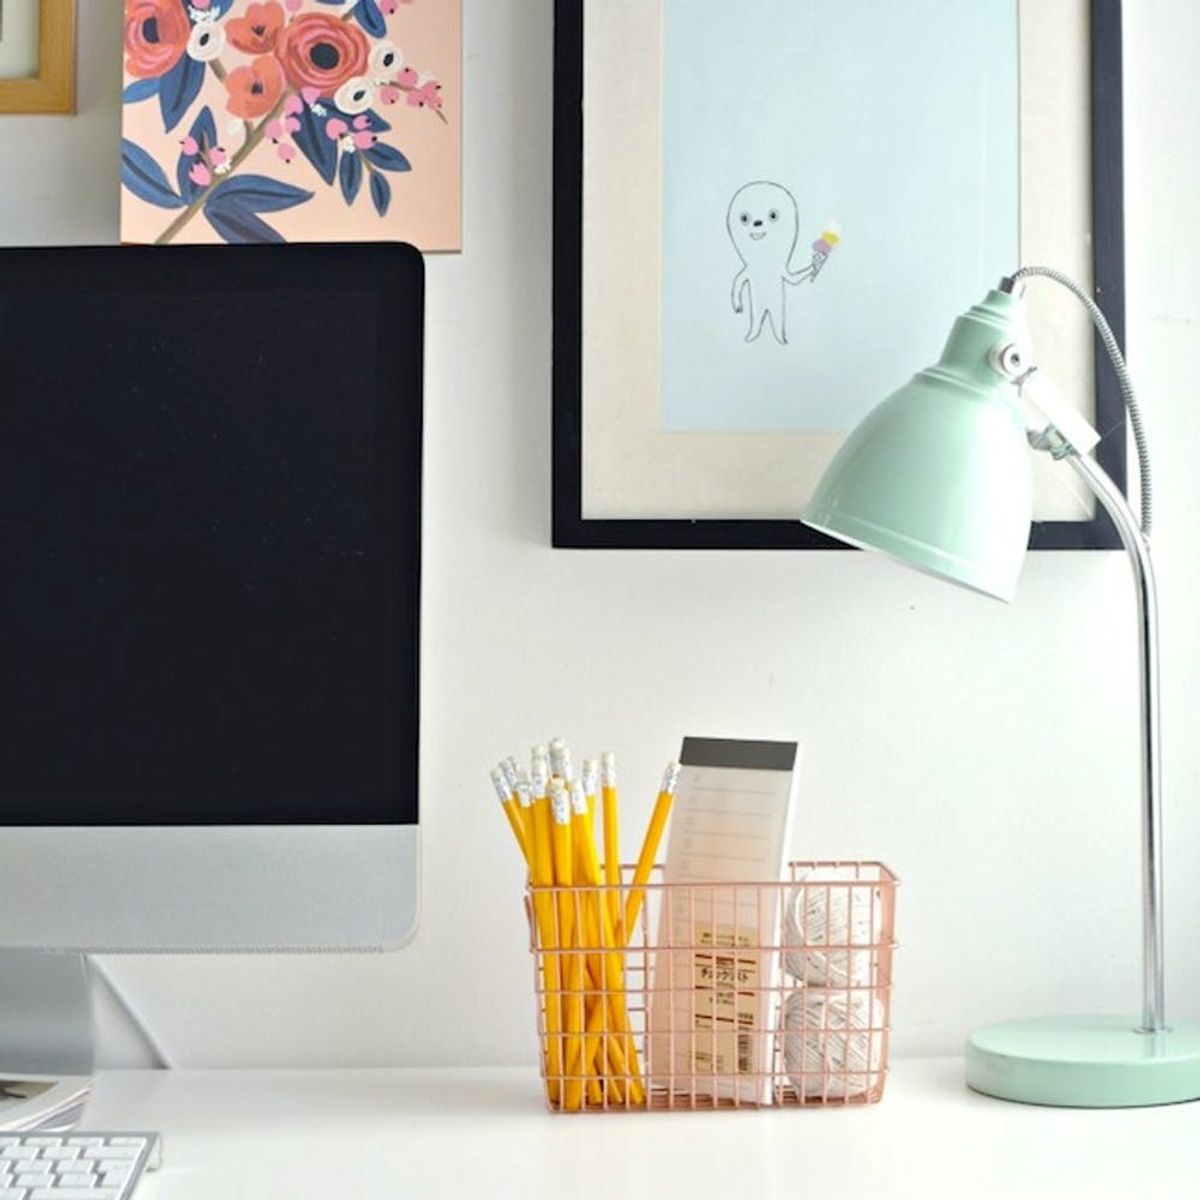 13 DIY Wire Storage Options That Actually Look Pretty